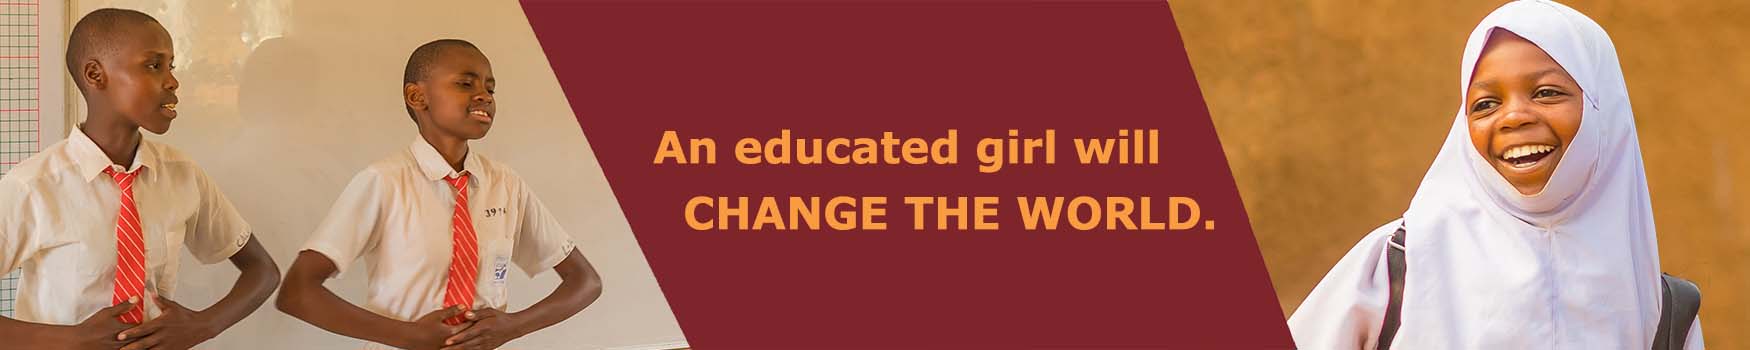 an educated girl will change the world